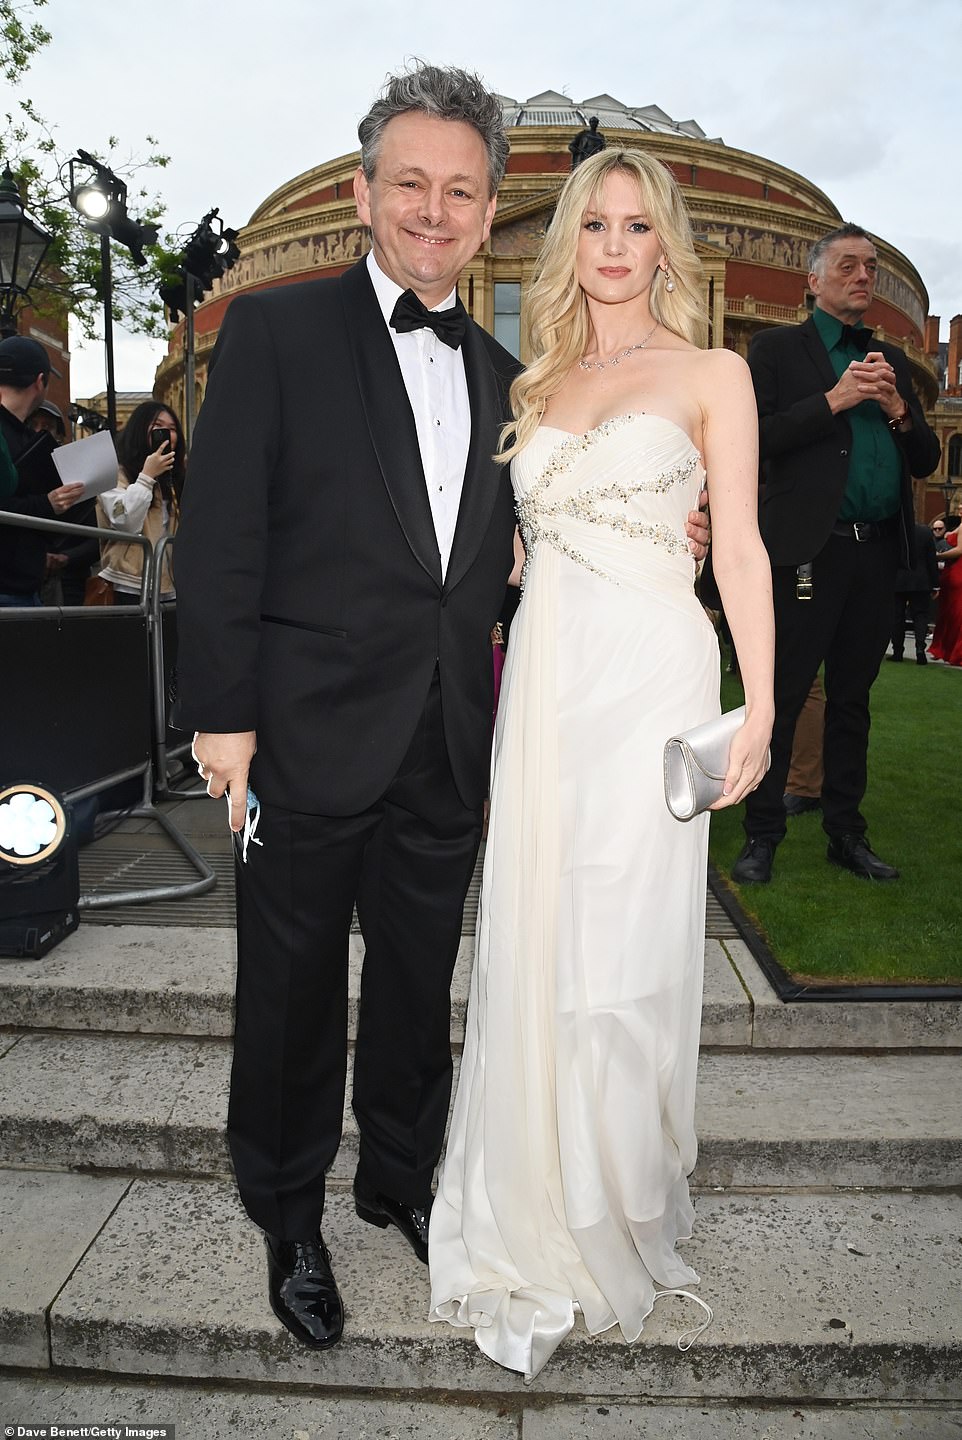 The actor, 55, was joined by his wife Anna Lundberg, 30, who looked ethereal in a floaty strapless white gown